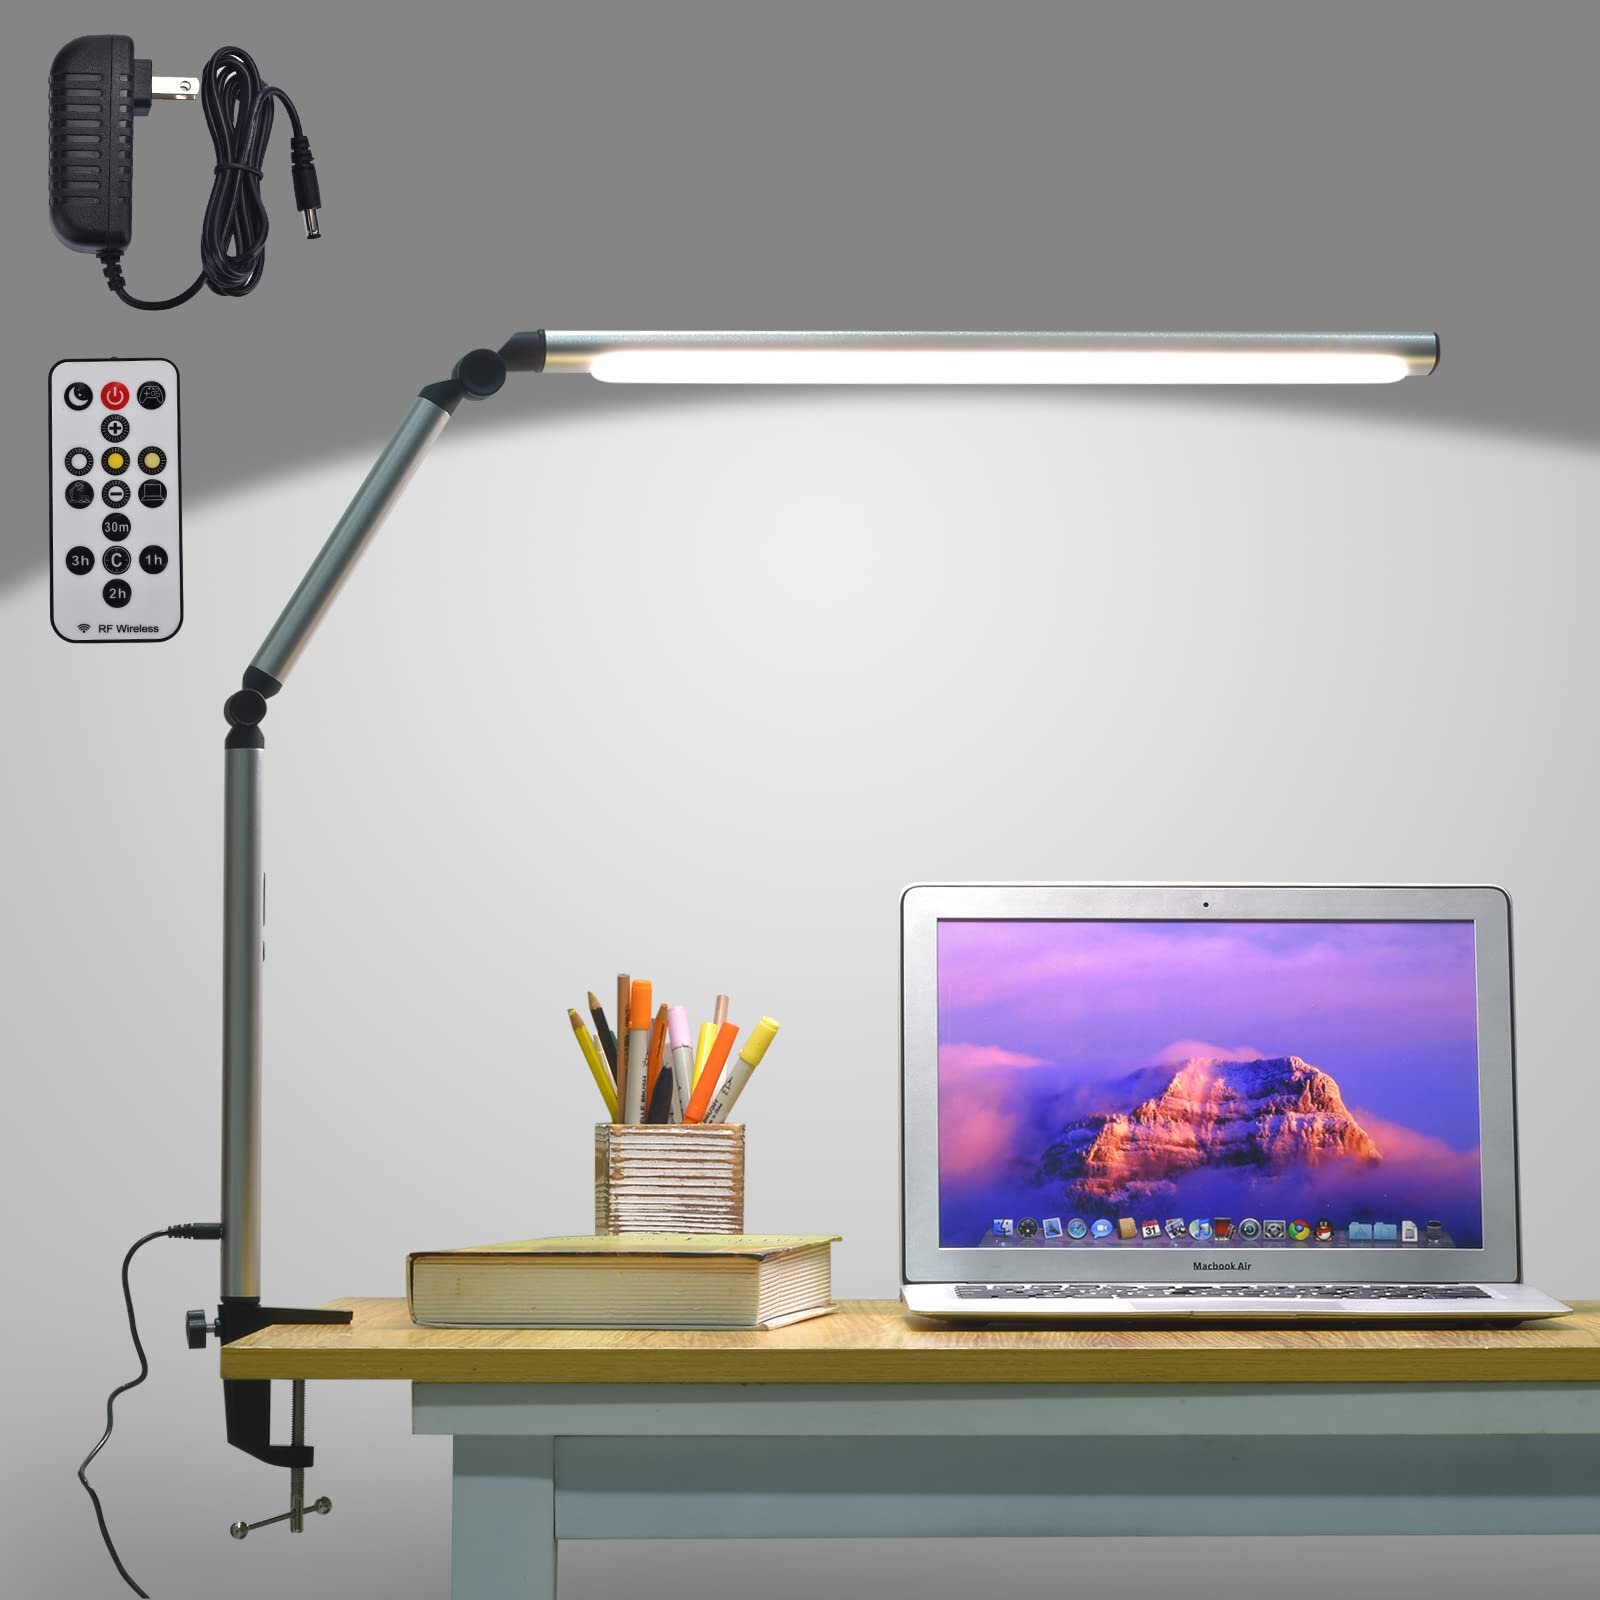 Craft Studio Brightness Upgrade and Memory Function Desk Light for Reading Office Workbench Black 3 Color Modes Eye-Caring Dimmable Architect Table Lamp Swing Arm Lamp with Clamp LED Desk Lamp